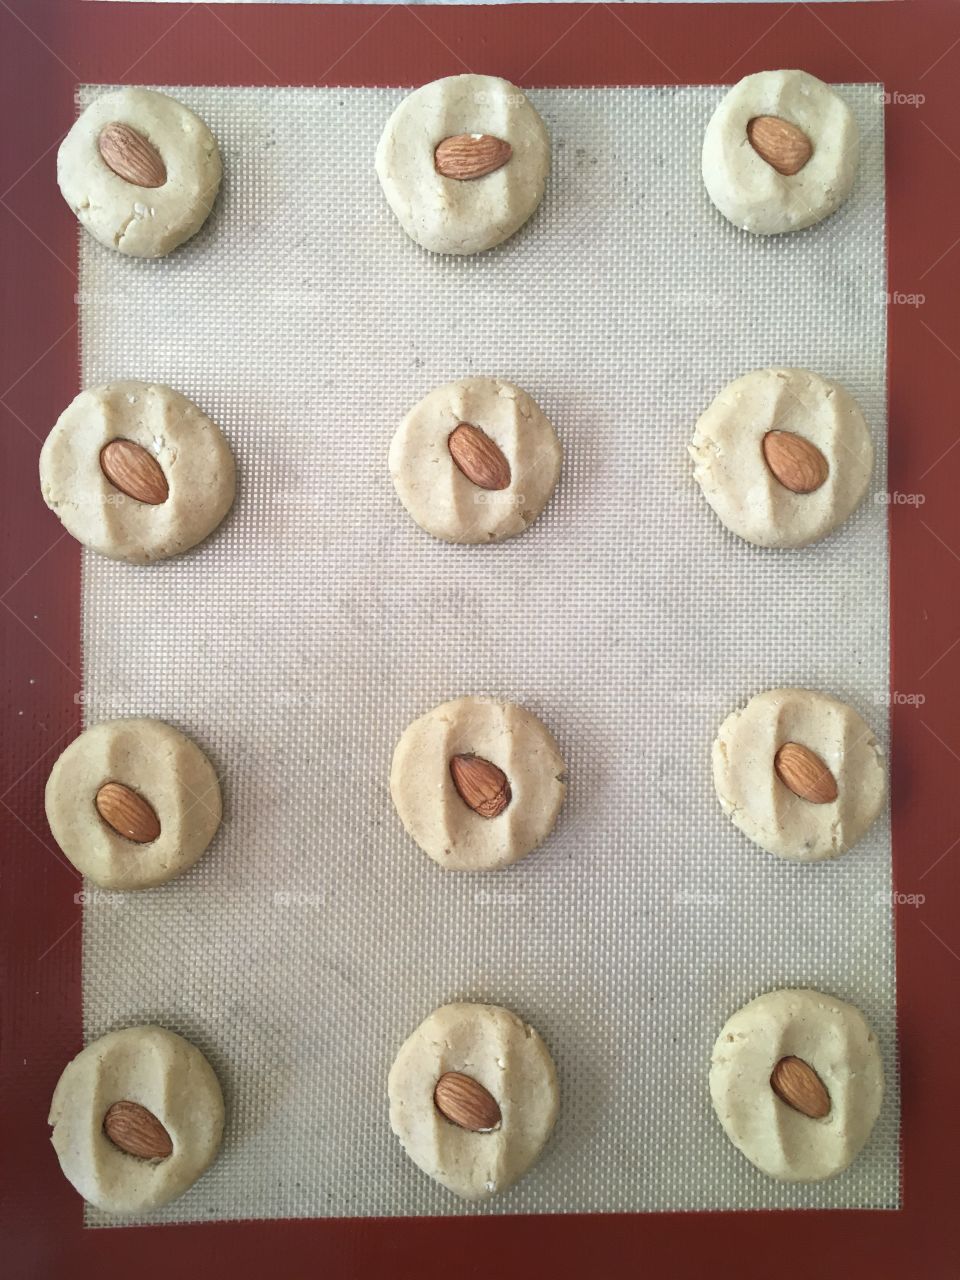 This is a photo of almond cookies on a baking tray with red border